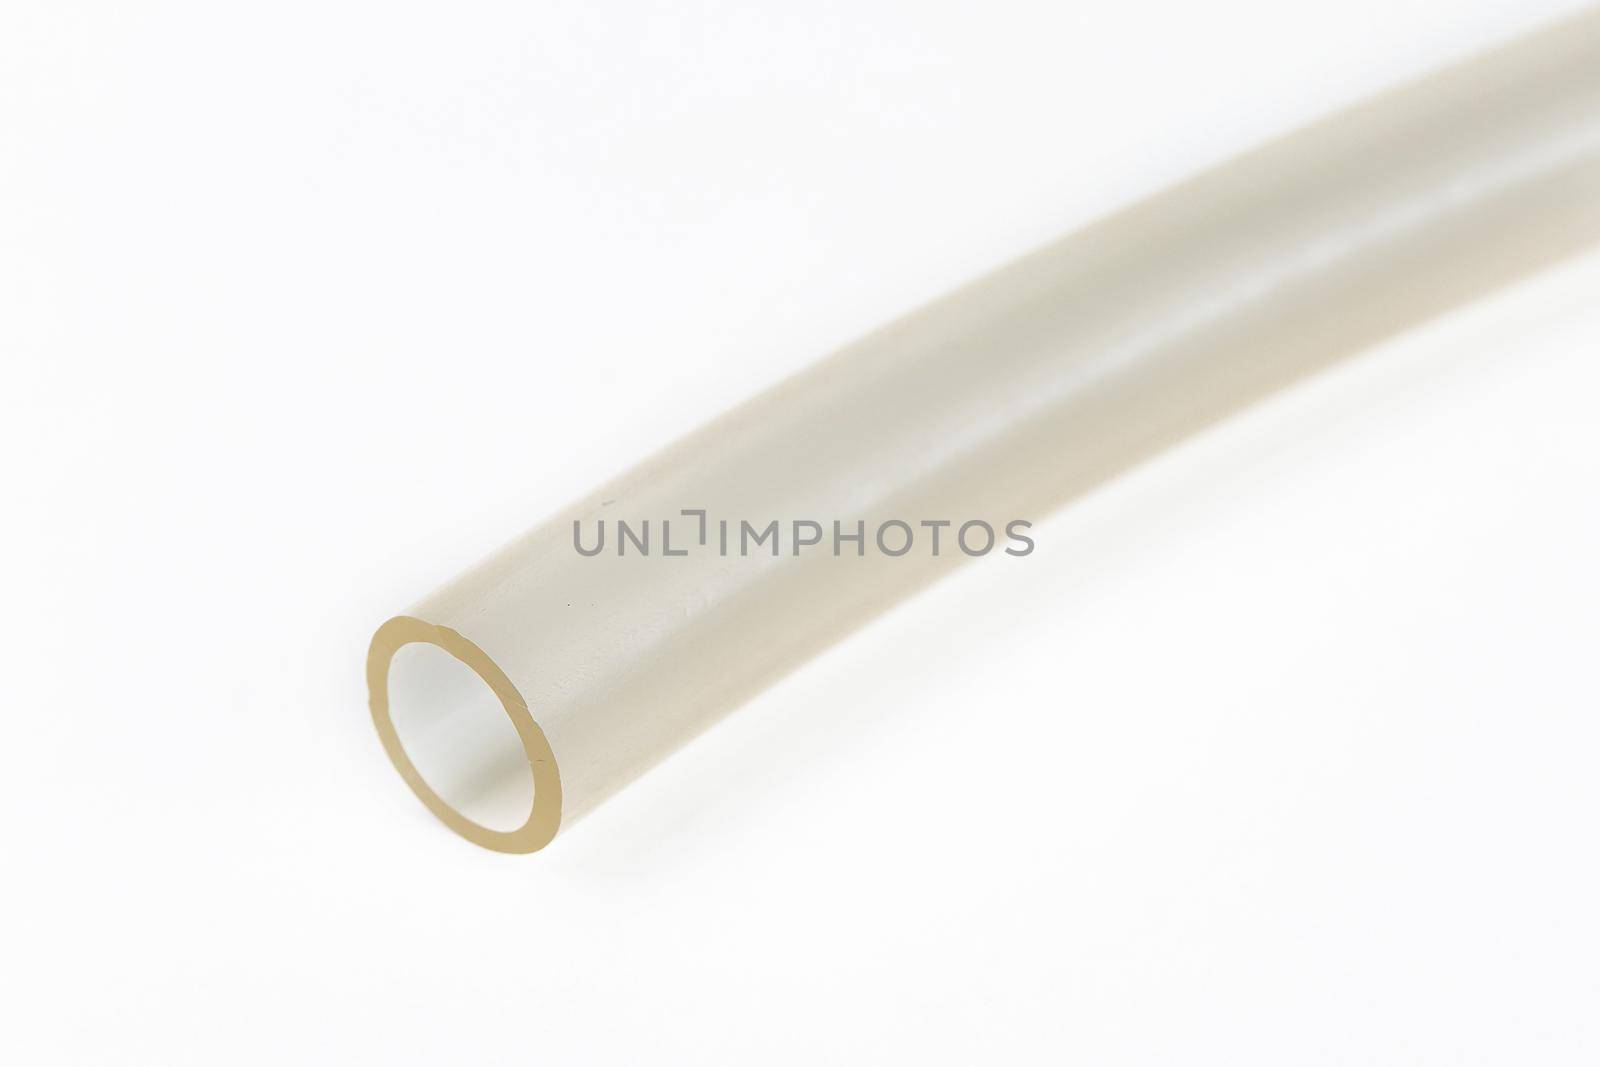 The cut tip of the rubber hose, on a white background by deandy